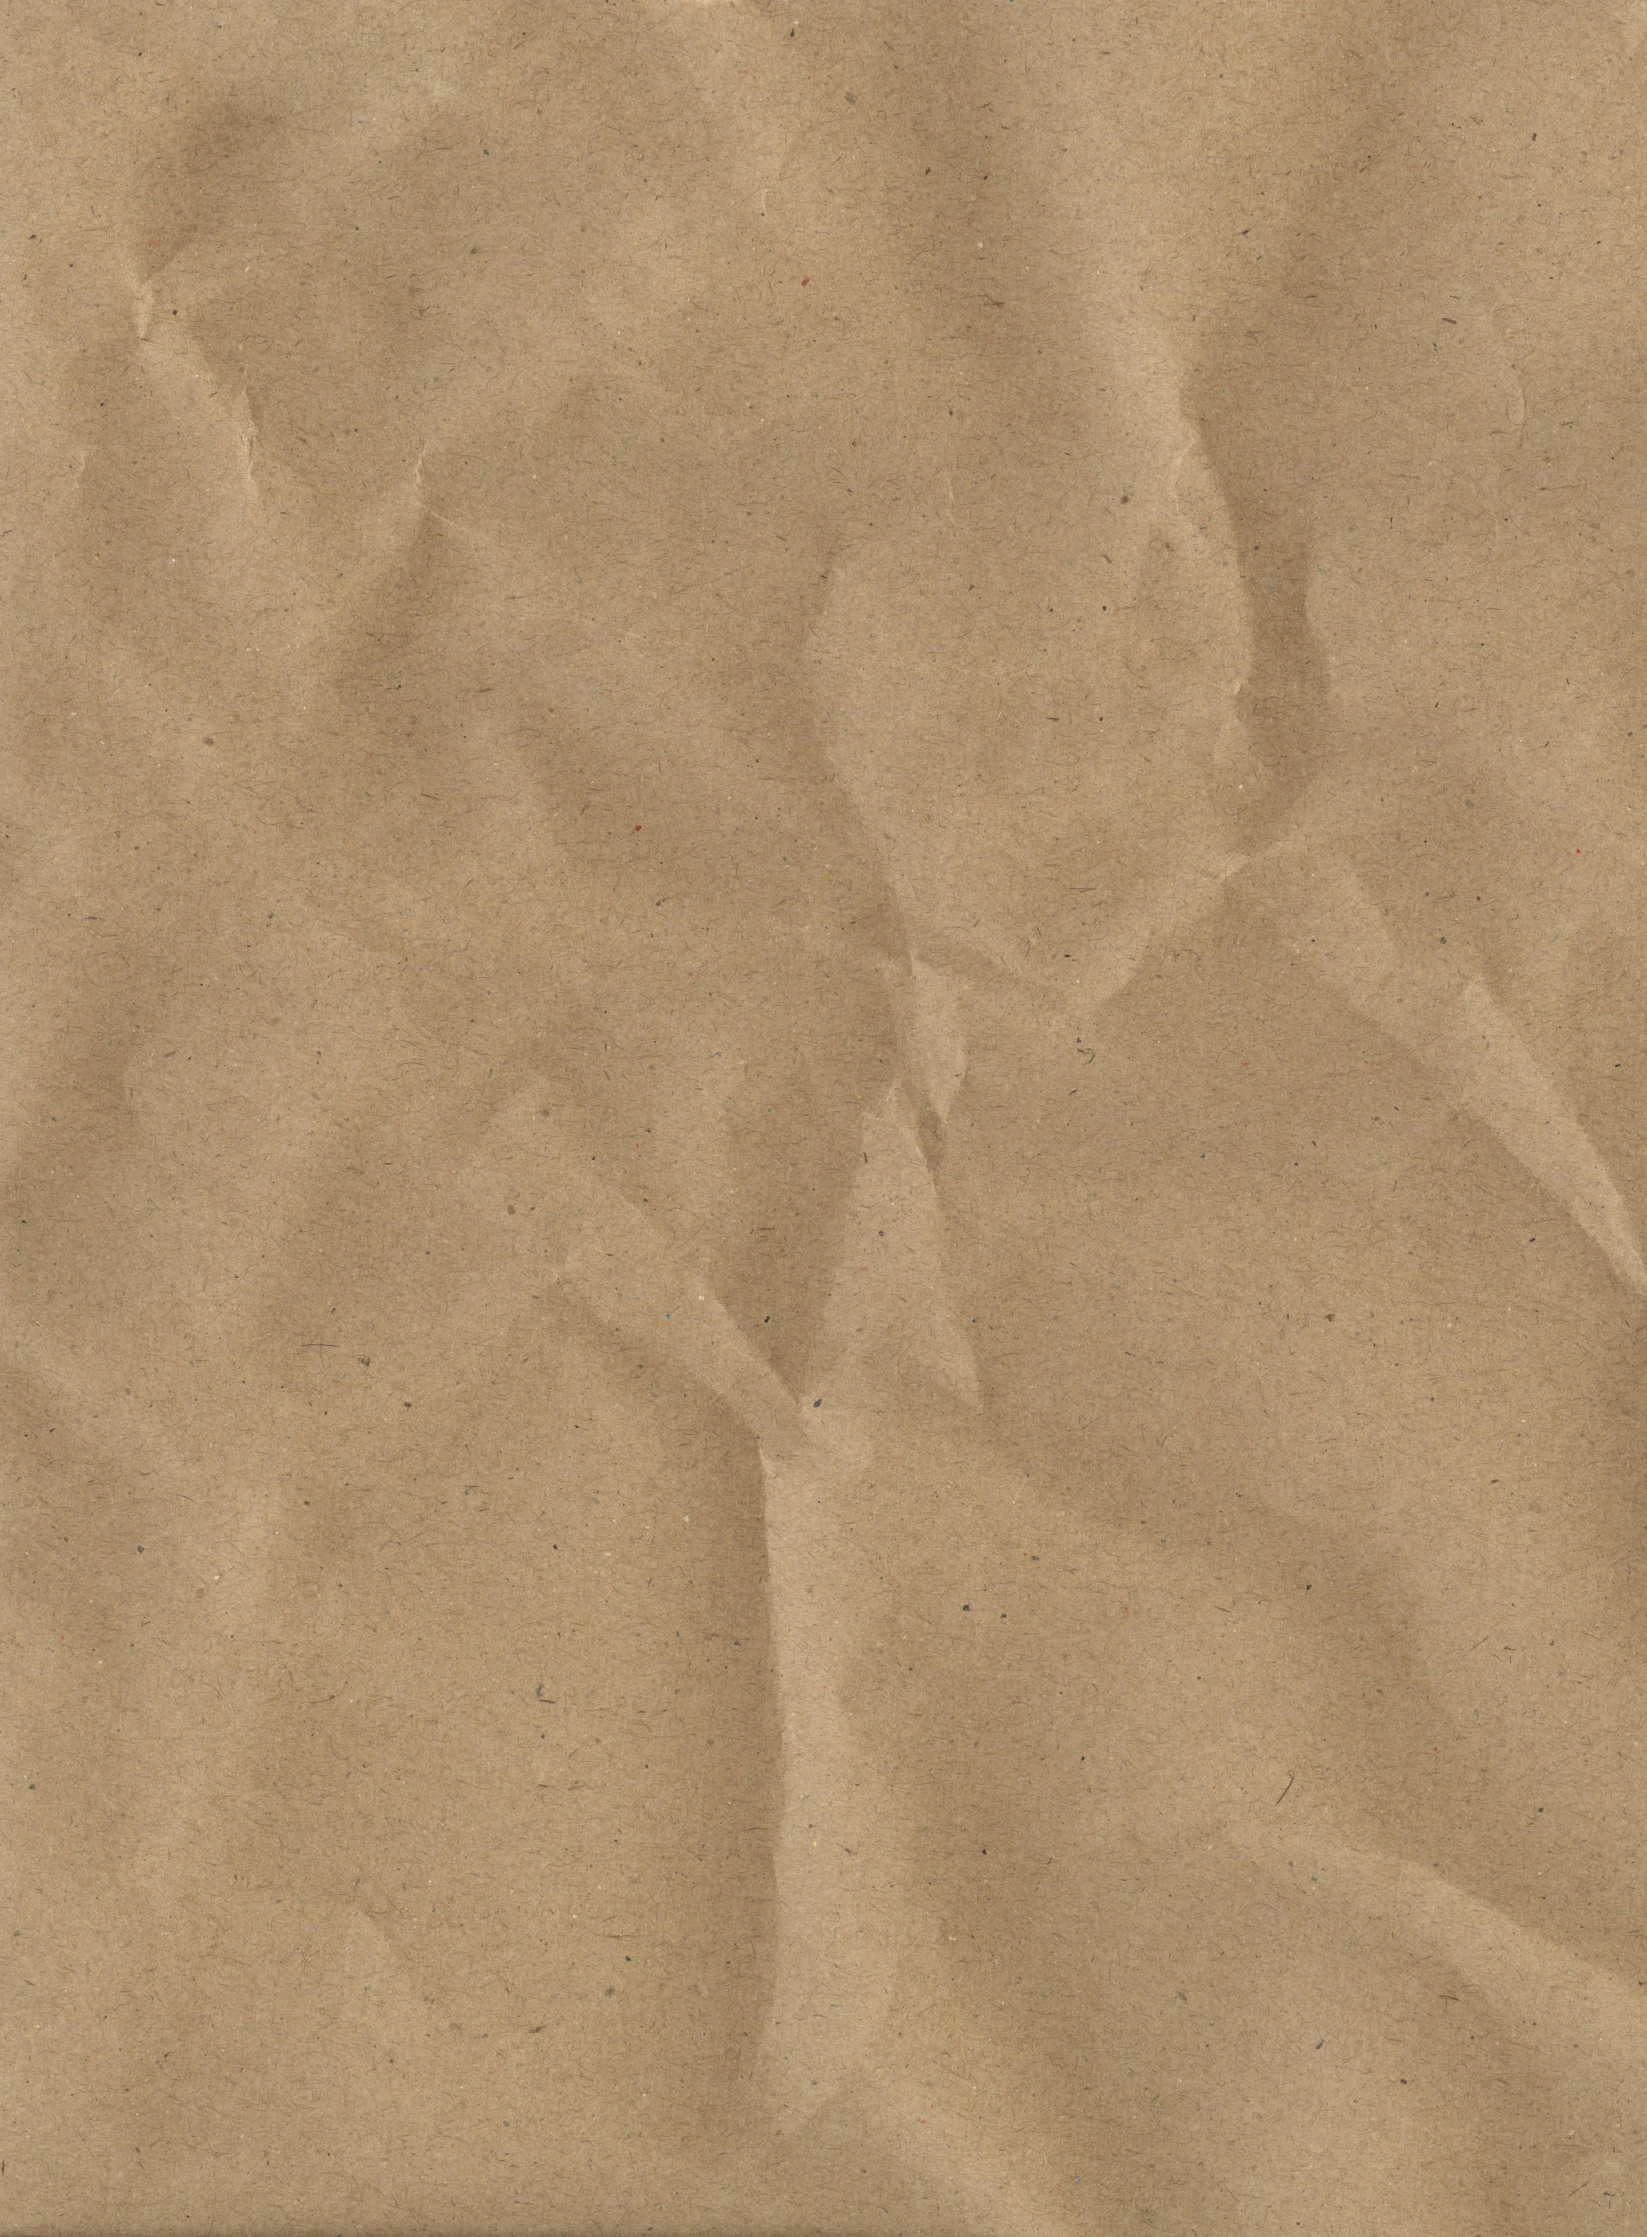 a po of a sand background in close up